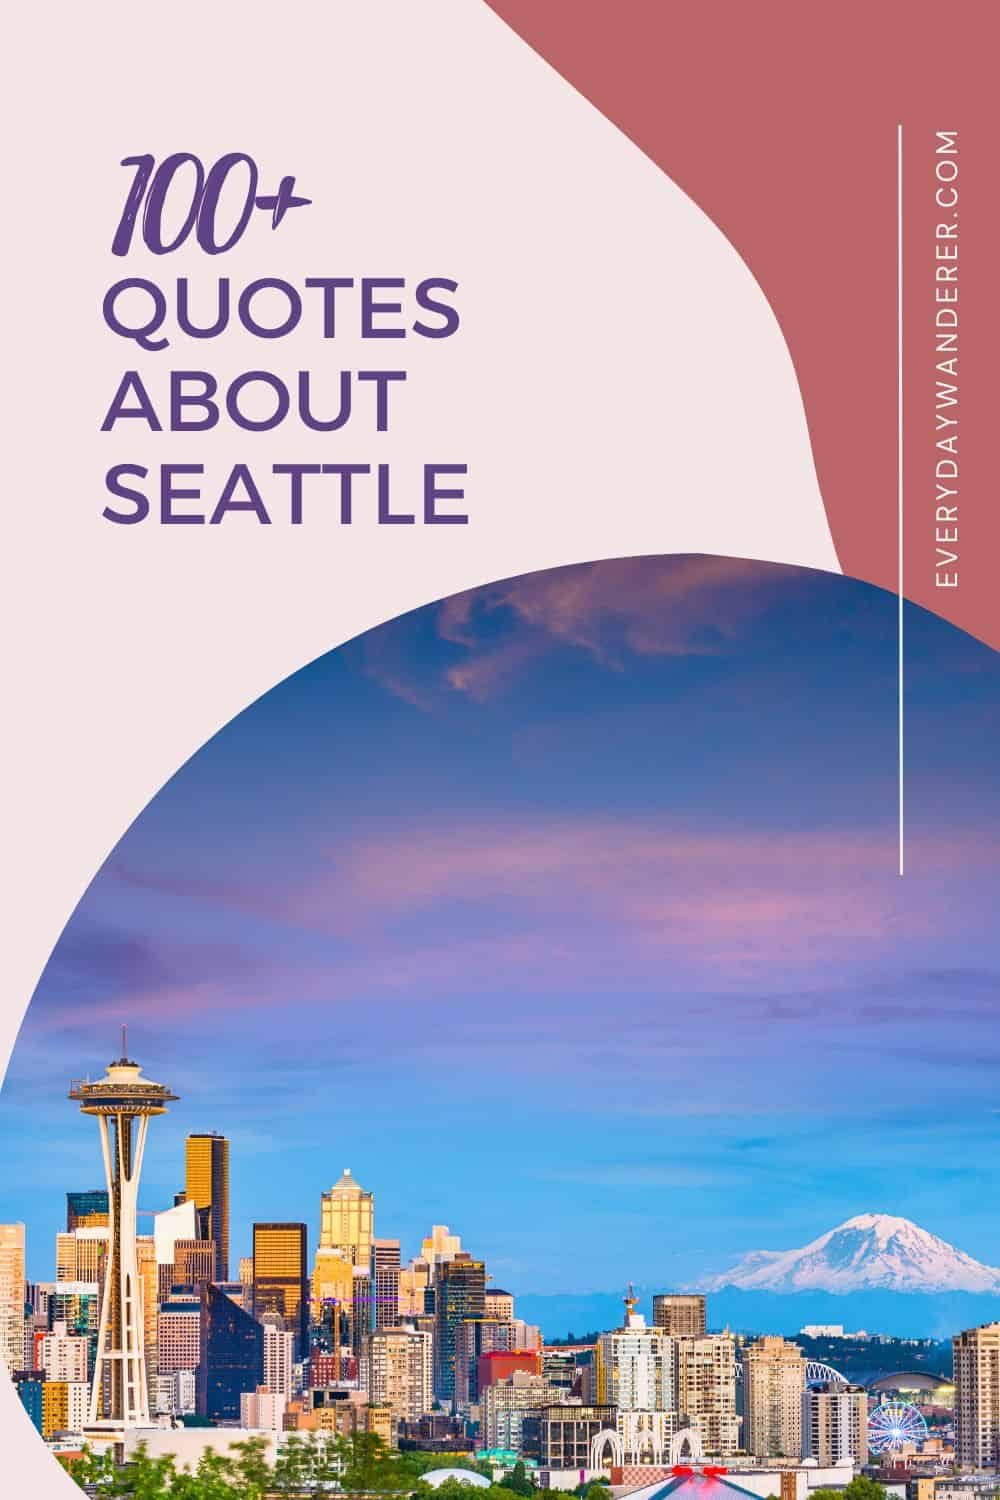 Seattle Quotes - Pin 1 - JPG